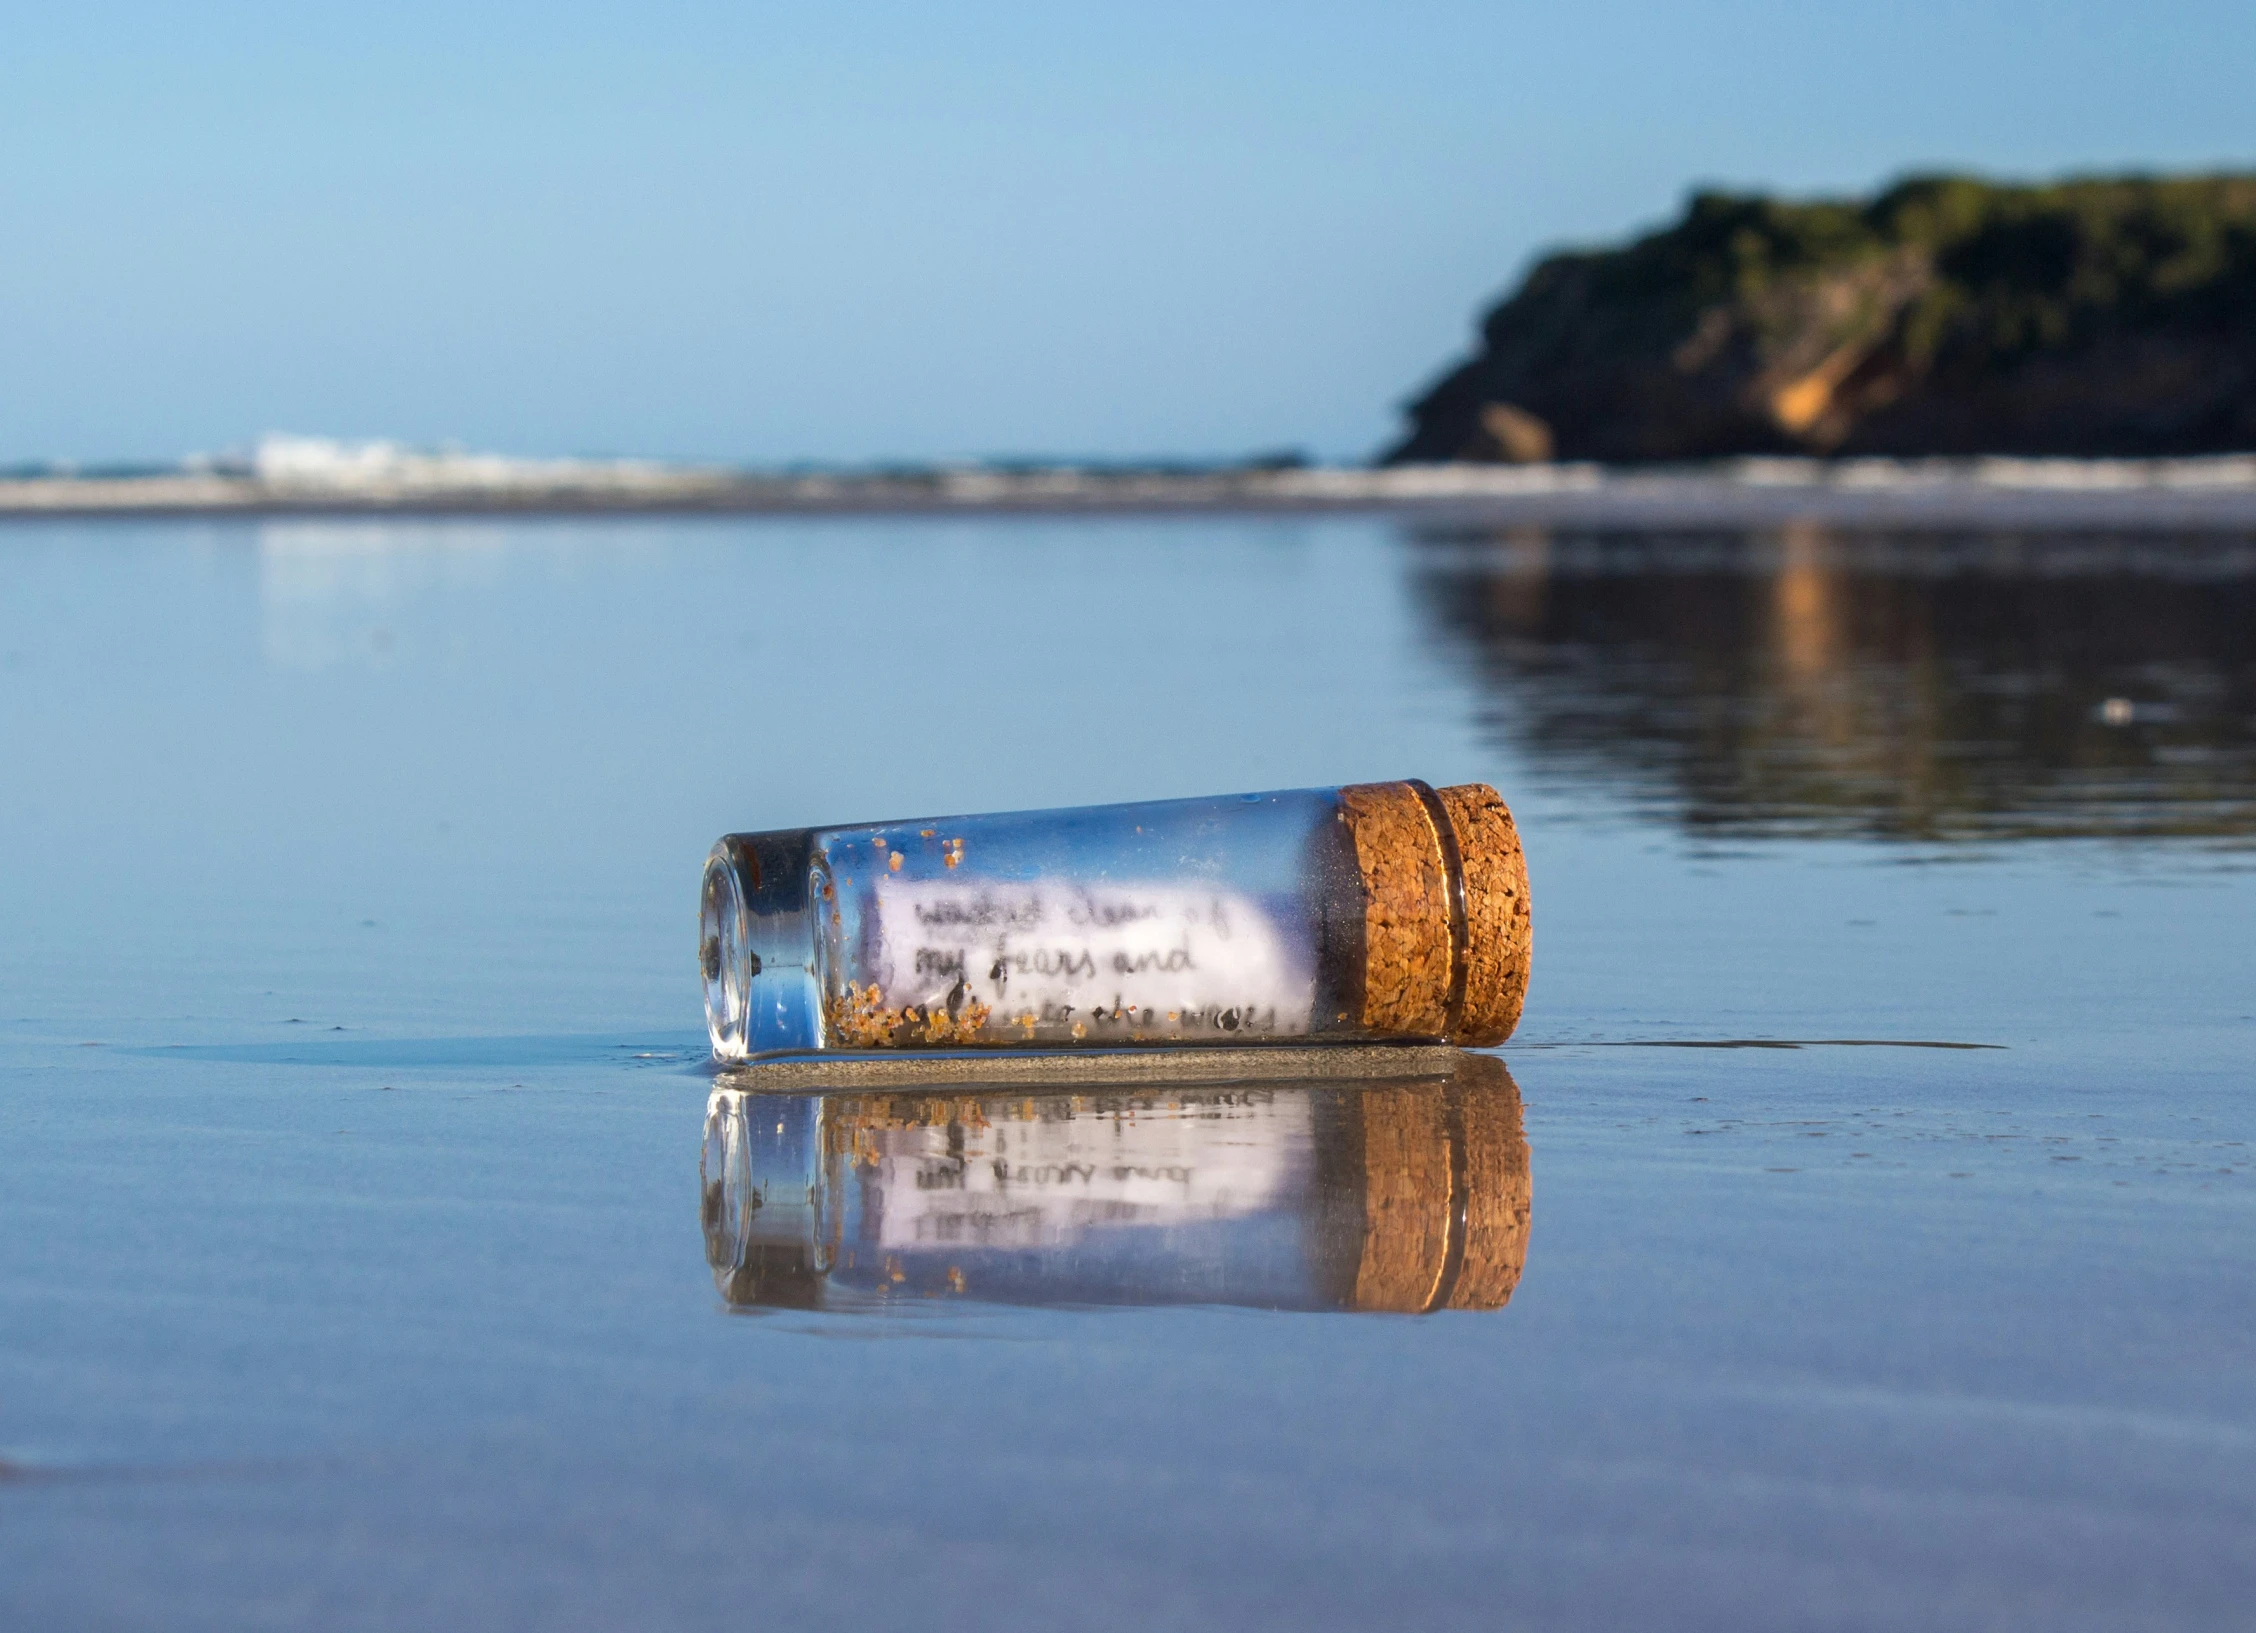 a message is placed in a bottle laying in the shallow water